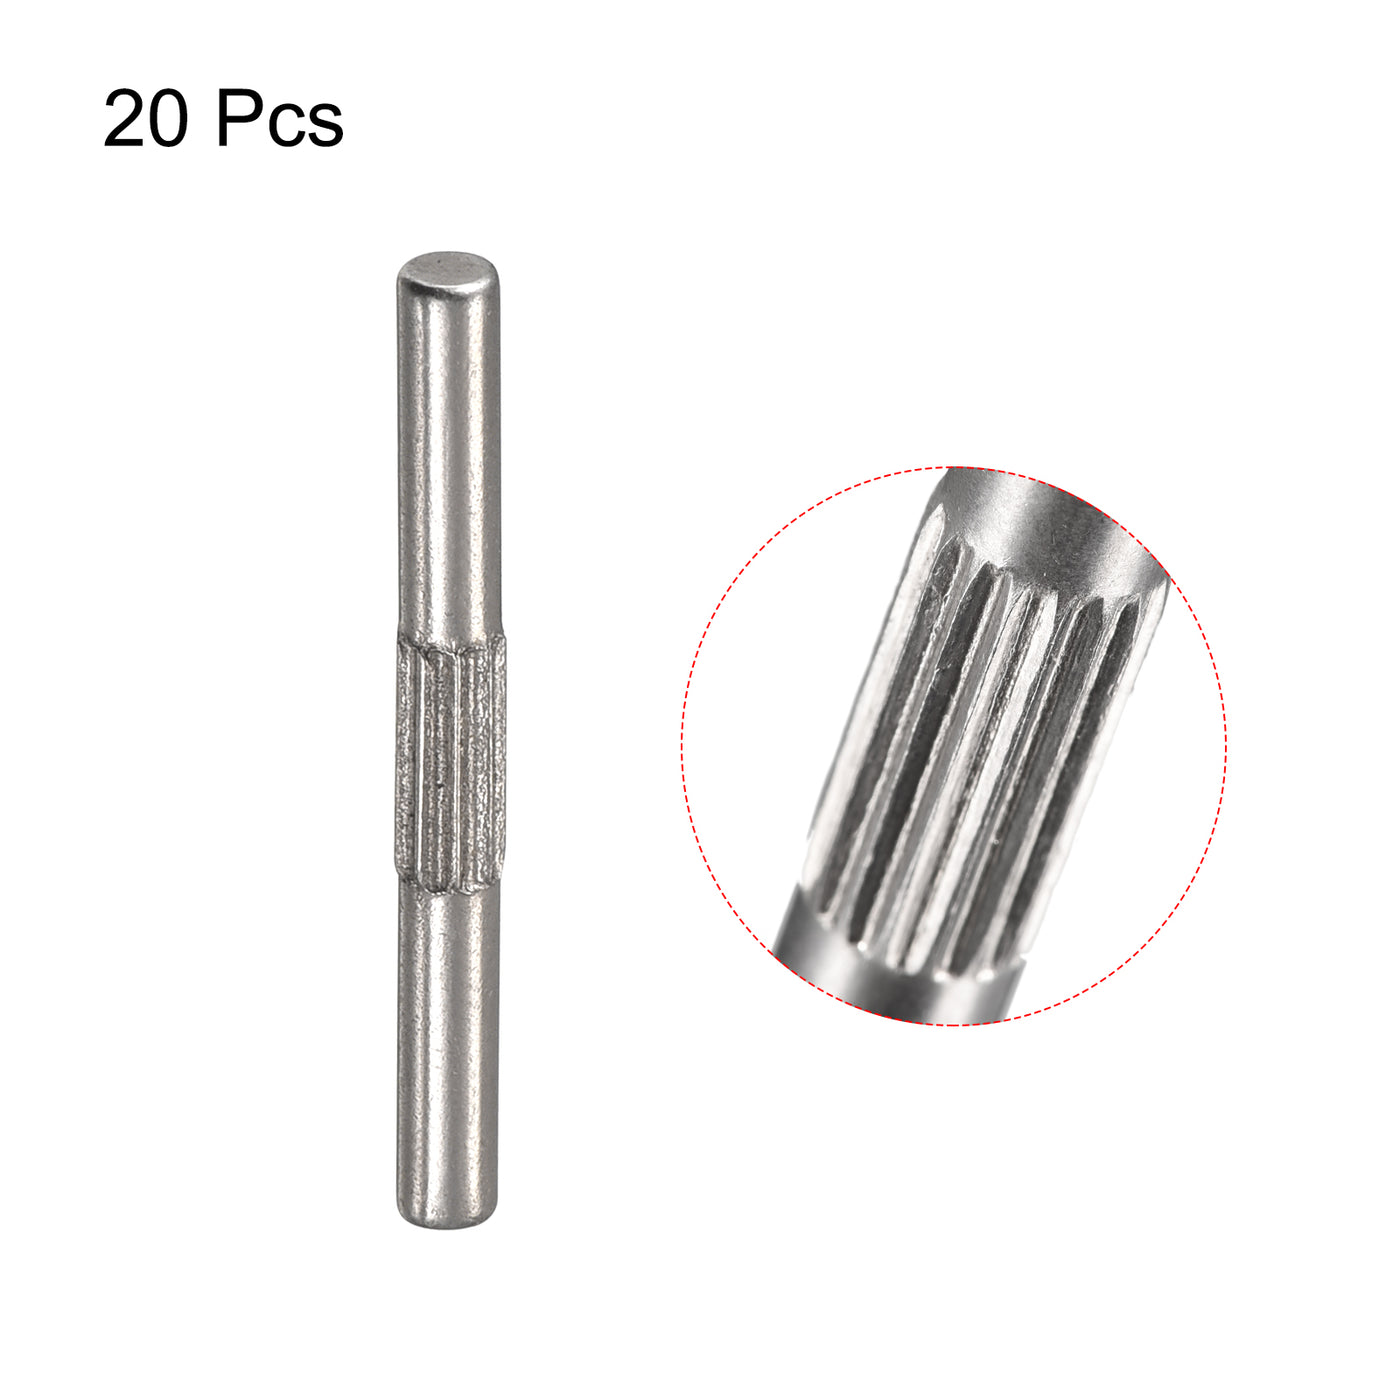 uxcell Uxcell 2.5x20mm 304 Stainless Steel Dowel Pins, 20Pcs Center Knurled Chamfered End Pin